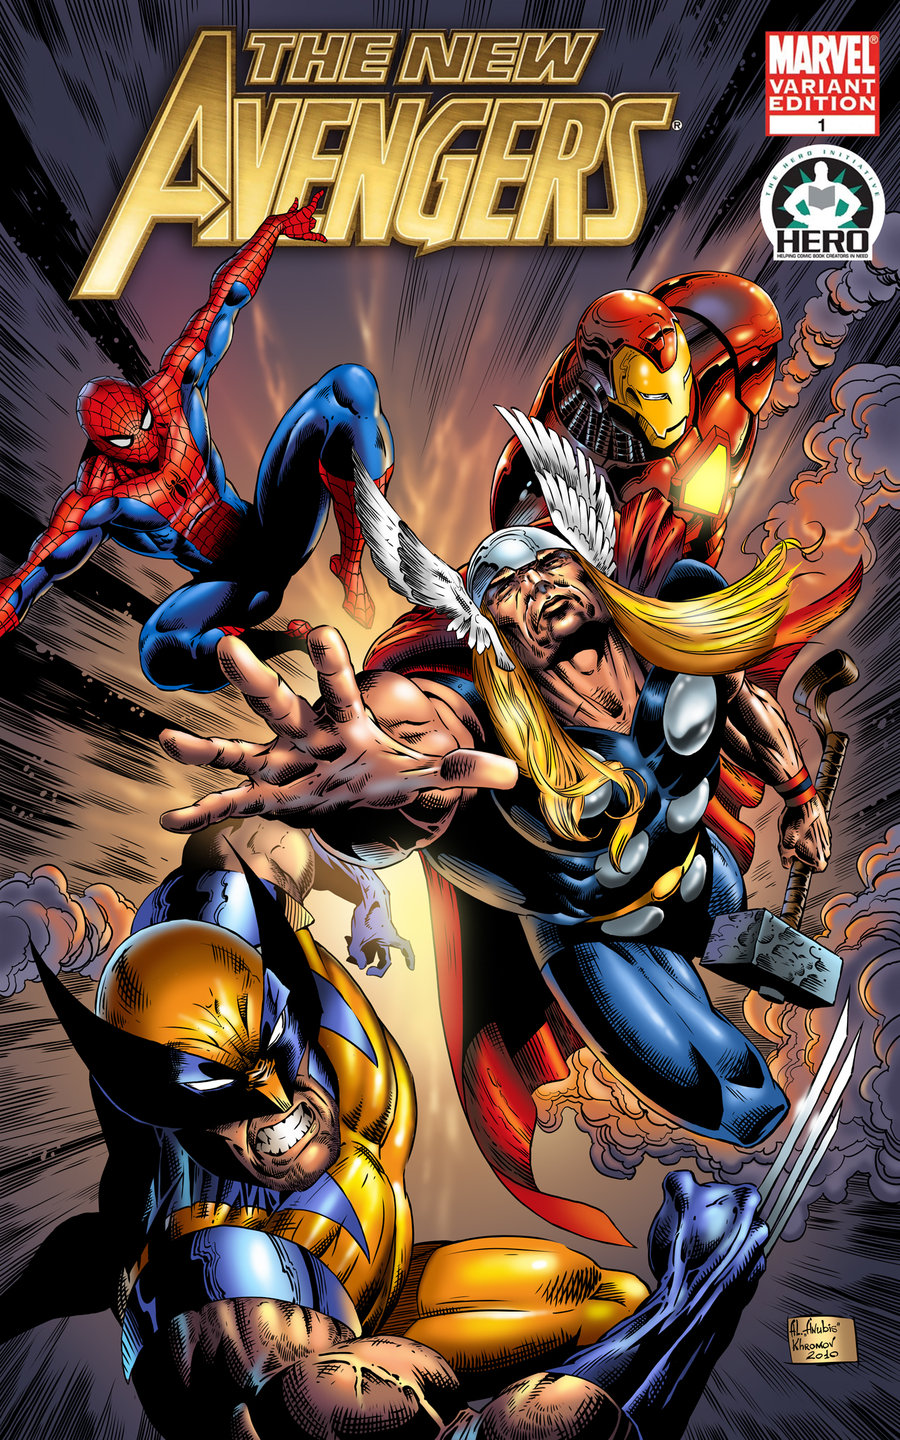 the_new_avengers_color_by_anubiscomics-d2zao9l.jpg